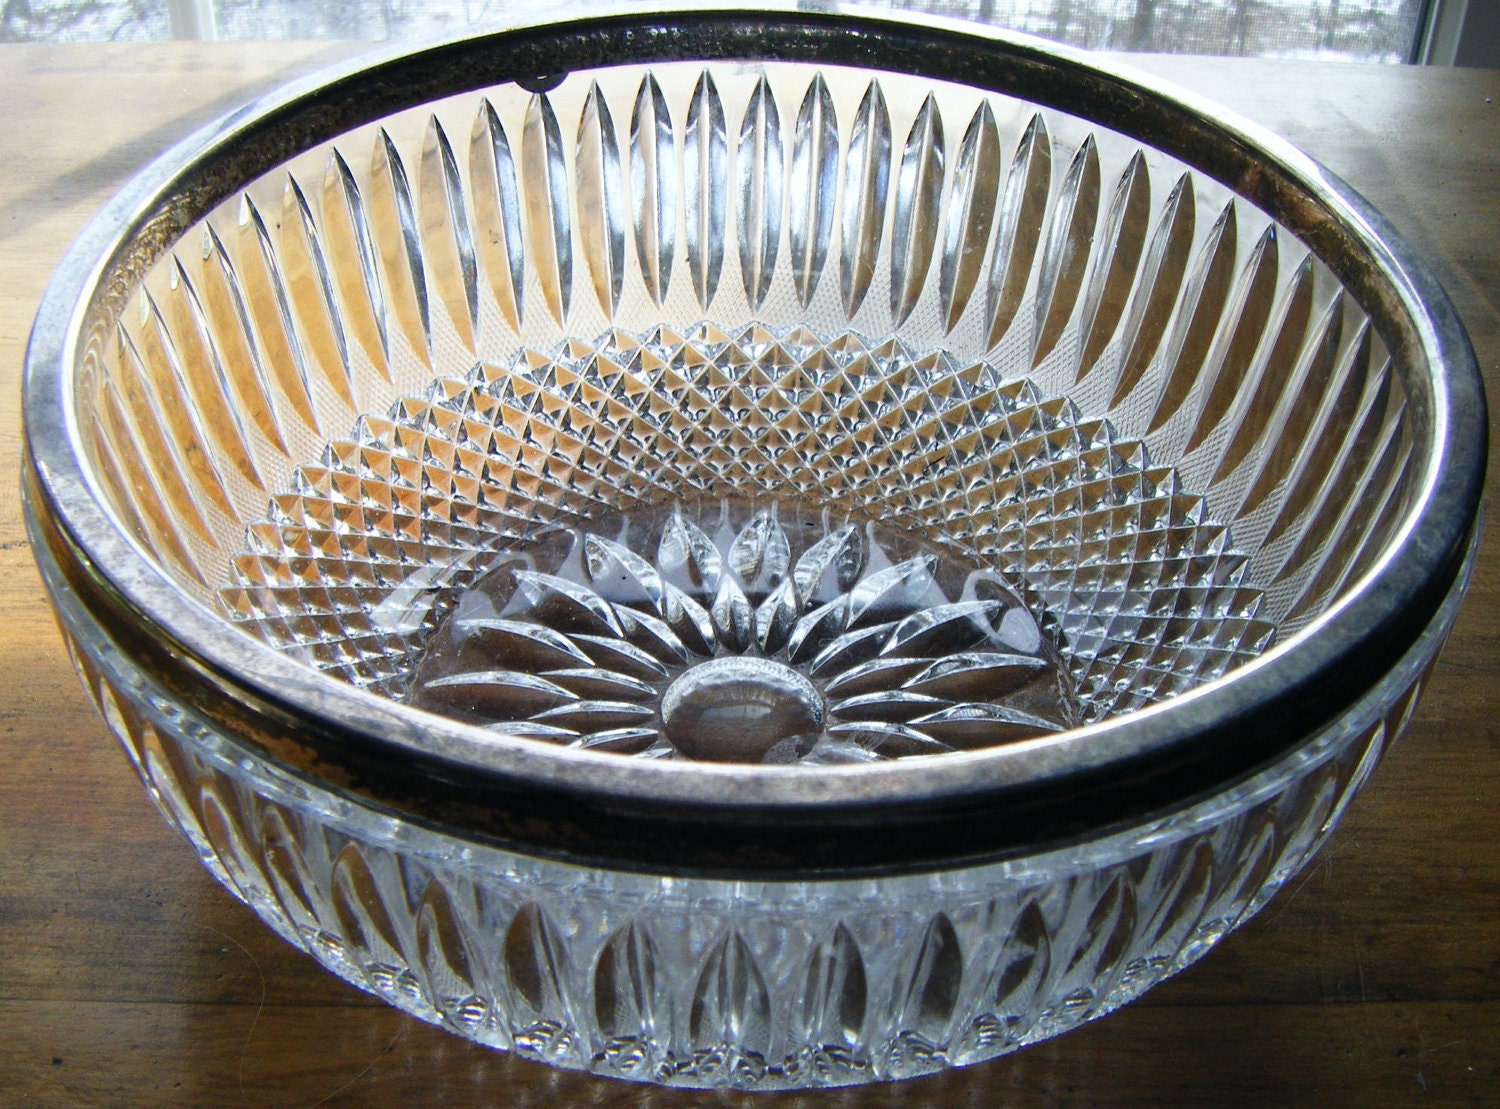 Stunning Sparkling Antique Lead Crystal Serving Bowl With Silver Rim